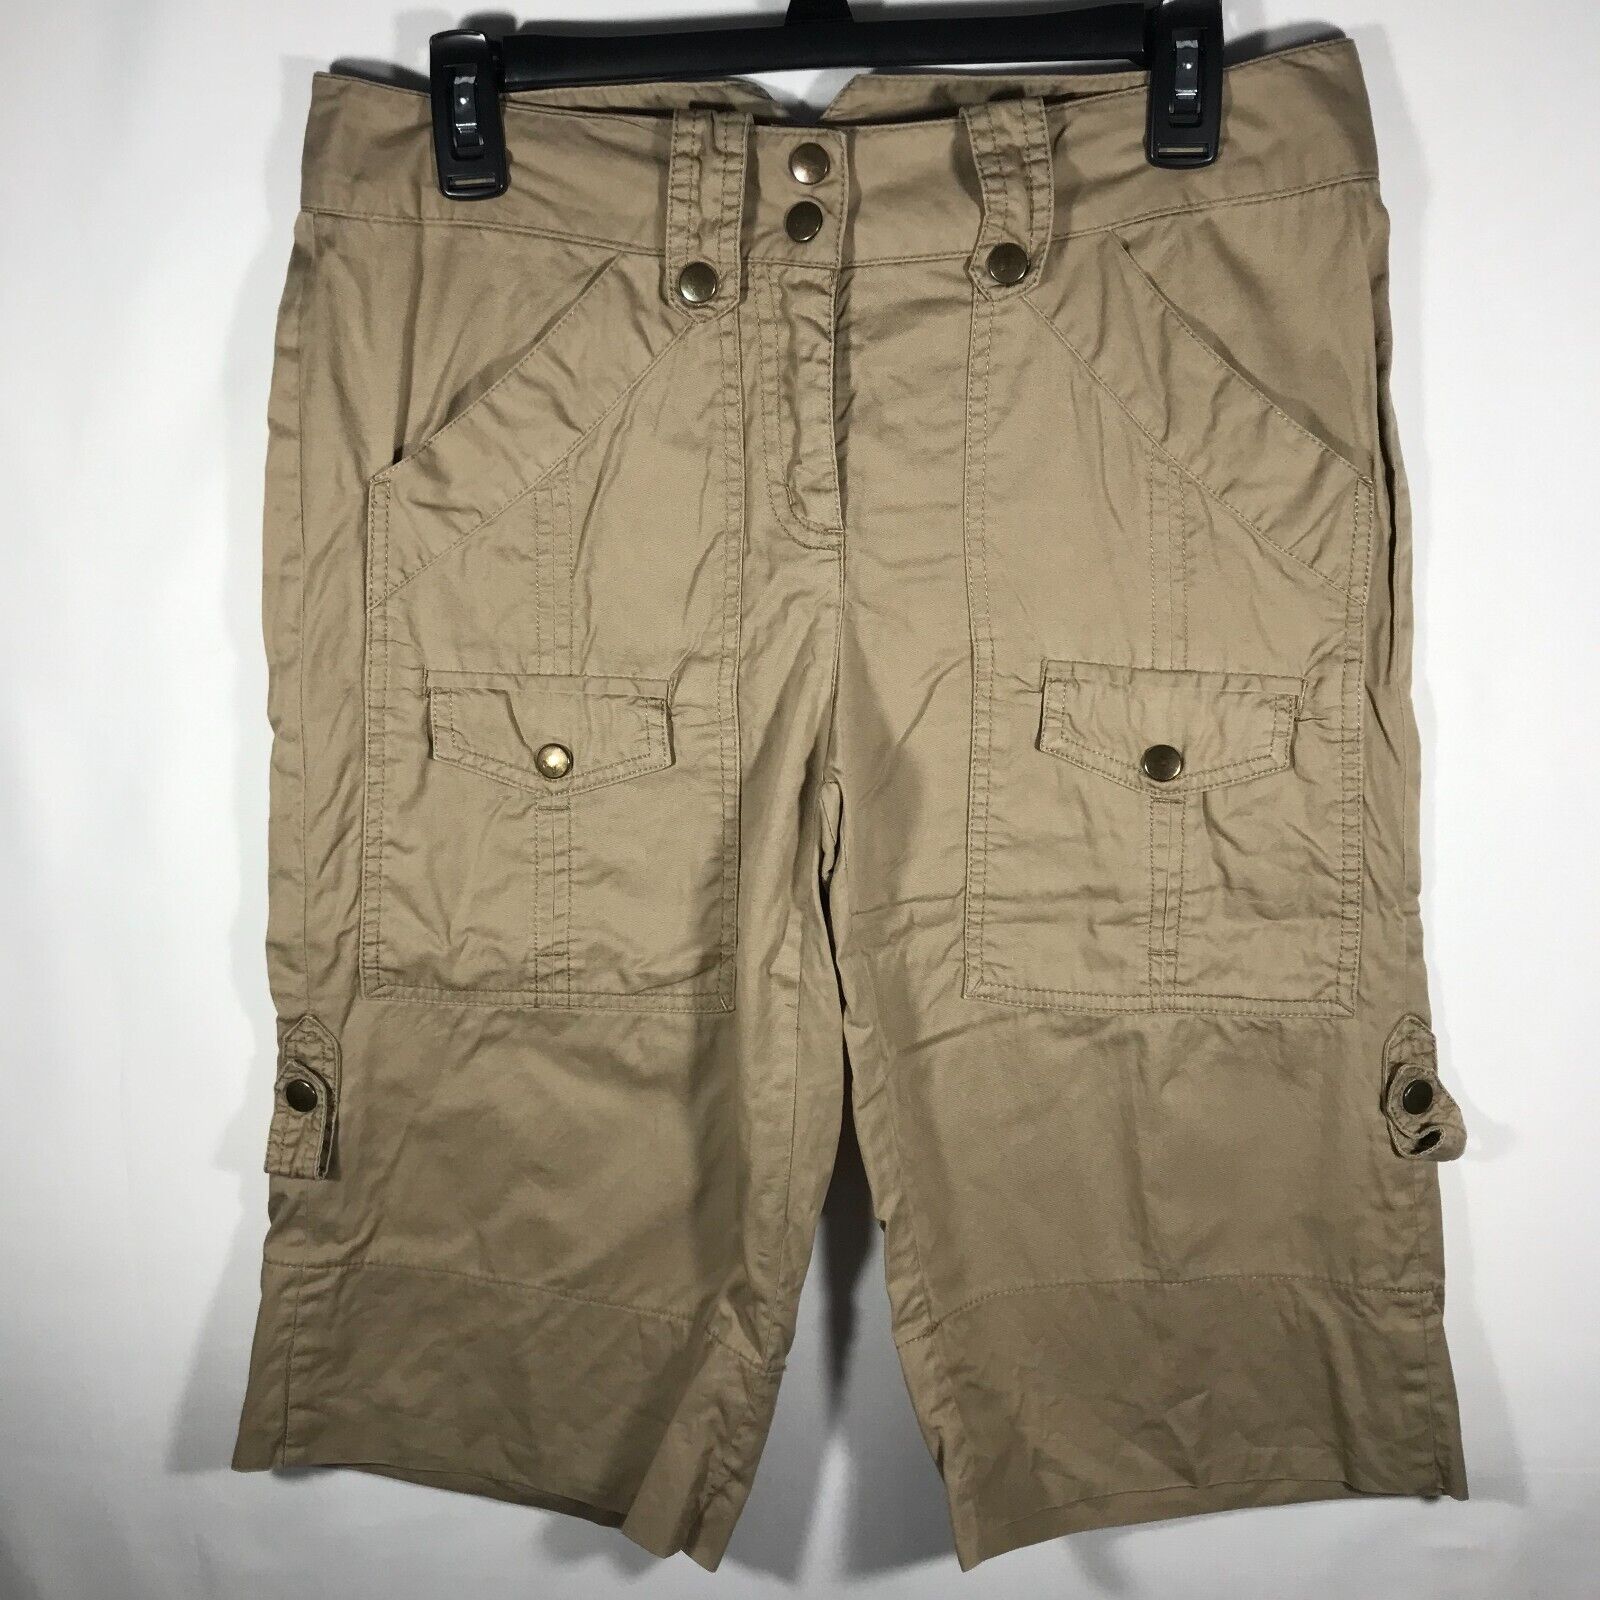 Bamboo Traders Shorts Women\'s Size 6 Tan Bermuda with Roll Tab